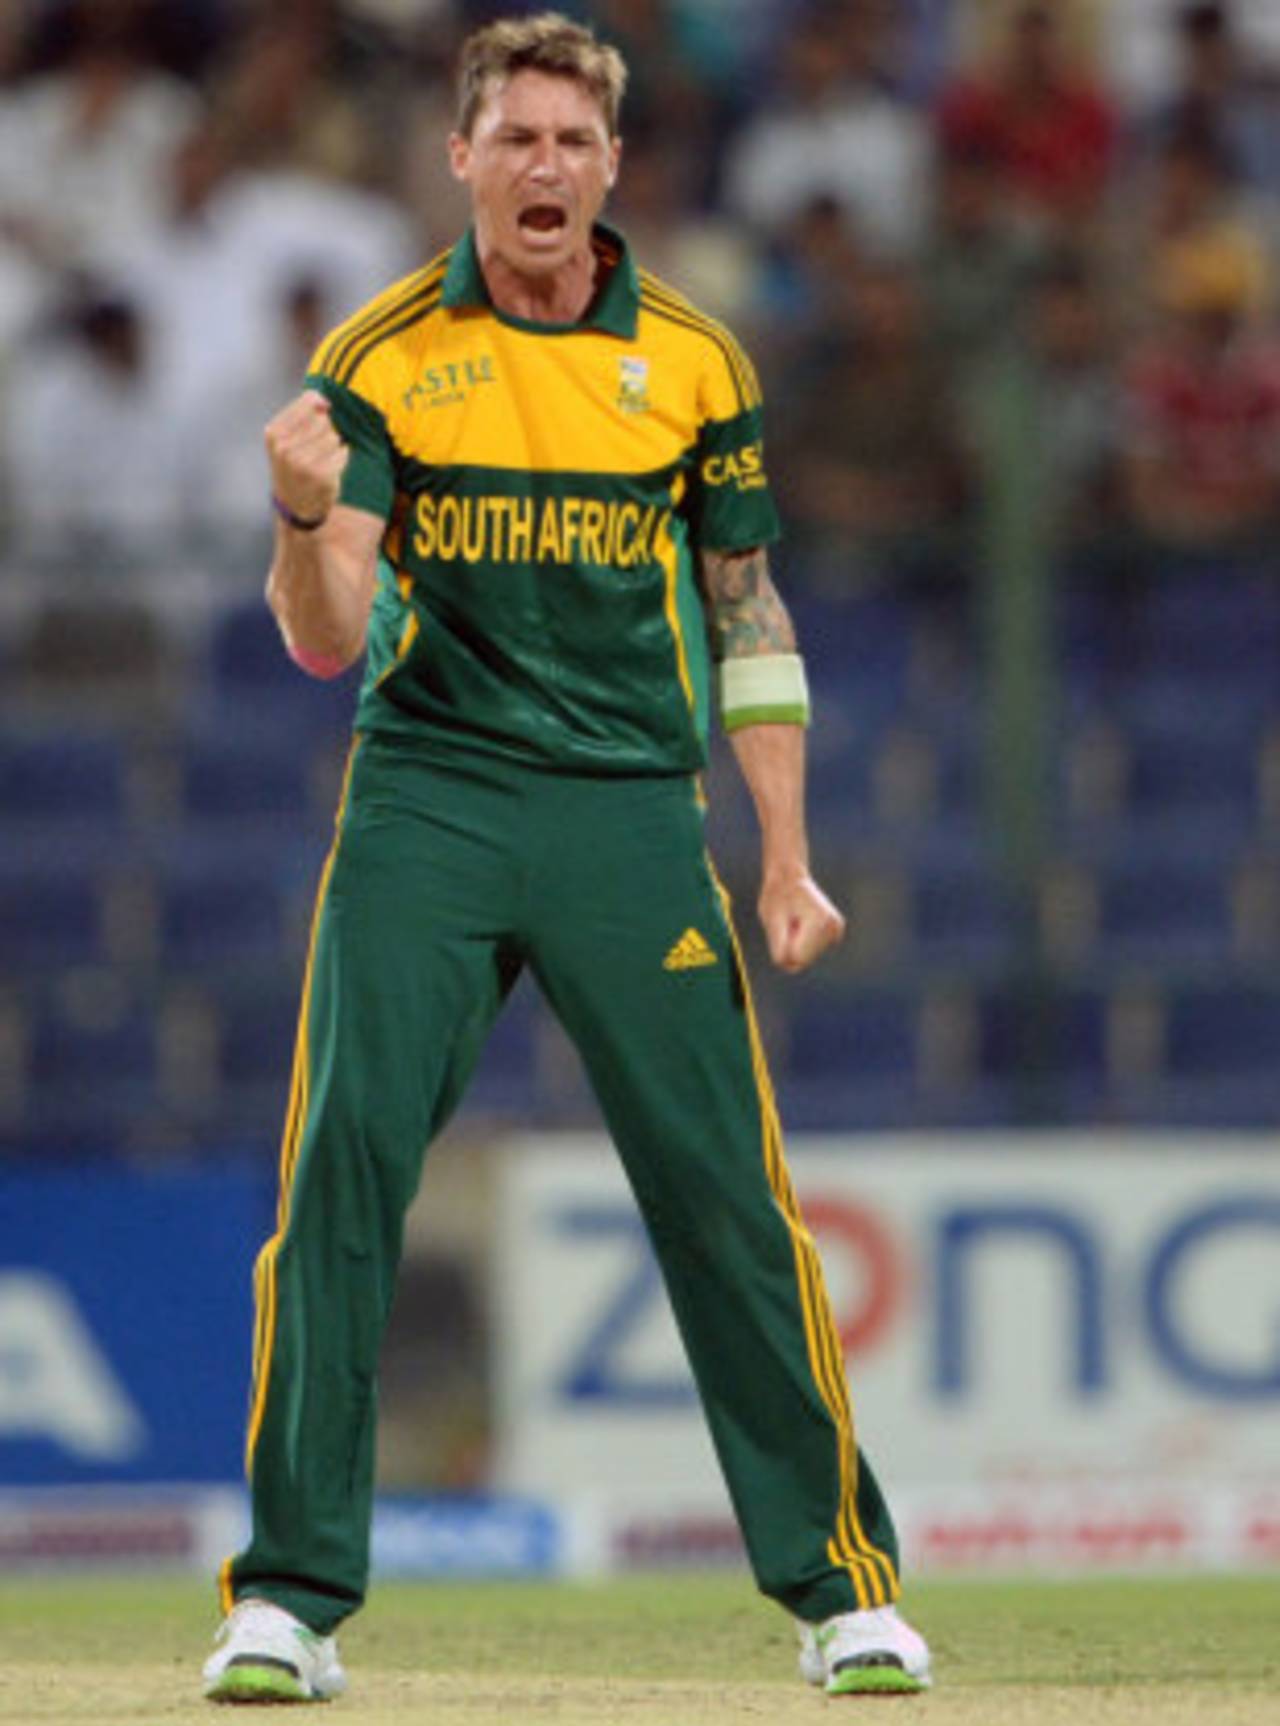 In Dale Steyn's eyes you can see that he knows he has the batsmen at his mercy&nbsp;&nbsp;&bull;&nbsp;&nbsp;AFP